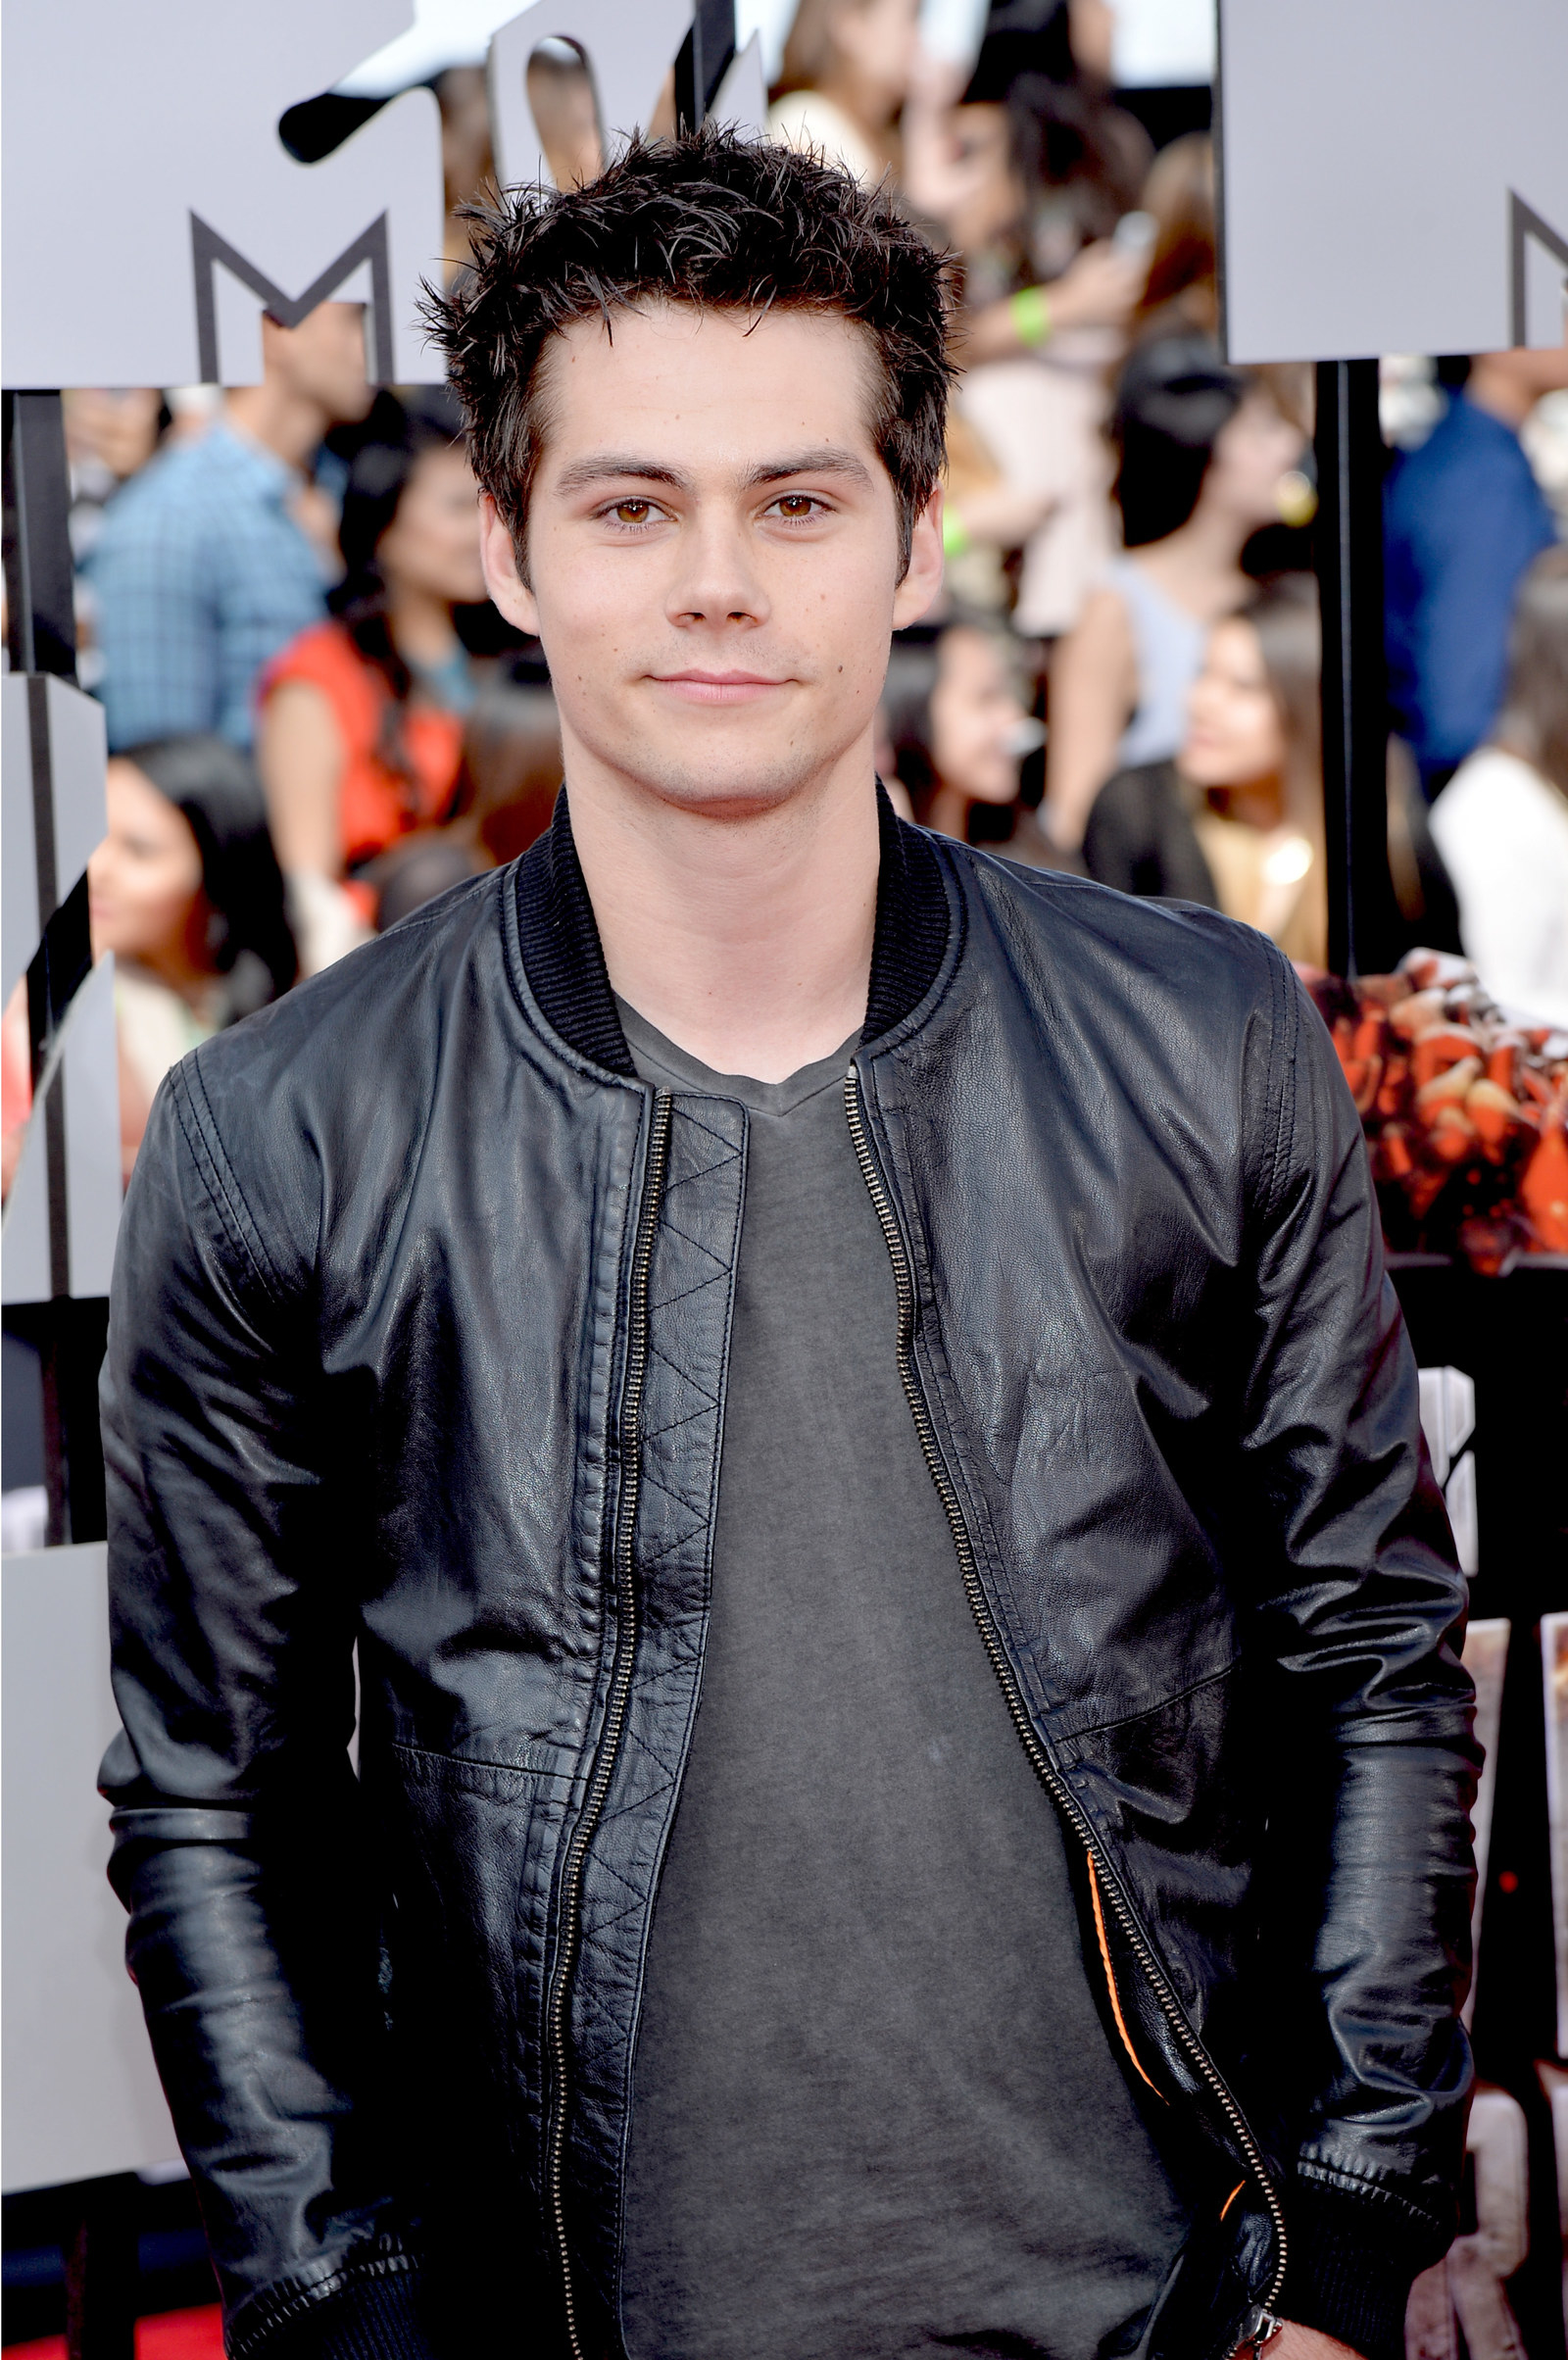 6. Dylan O'Brien's full name is...Dylan O'Brien. 